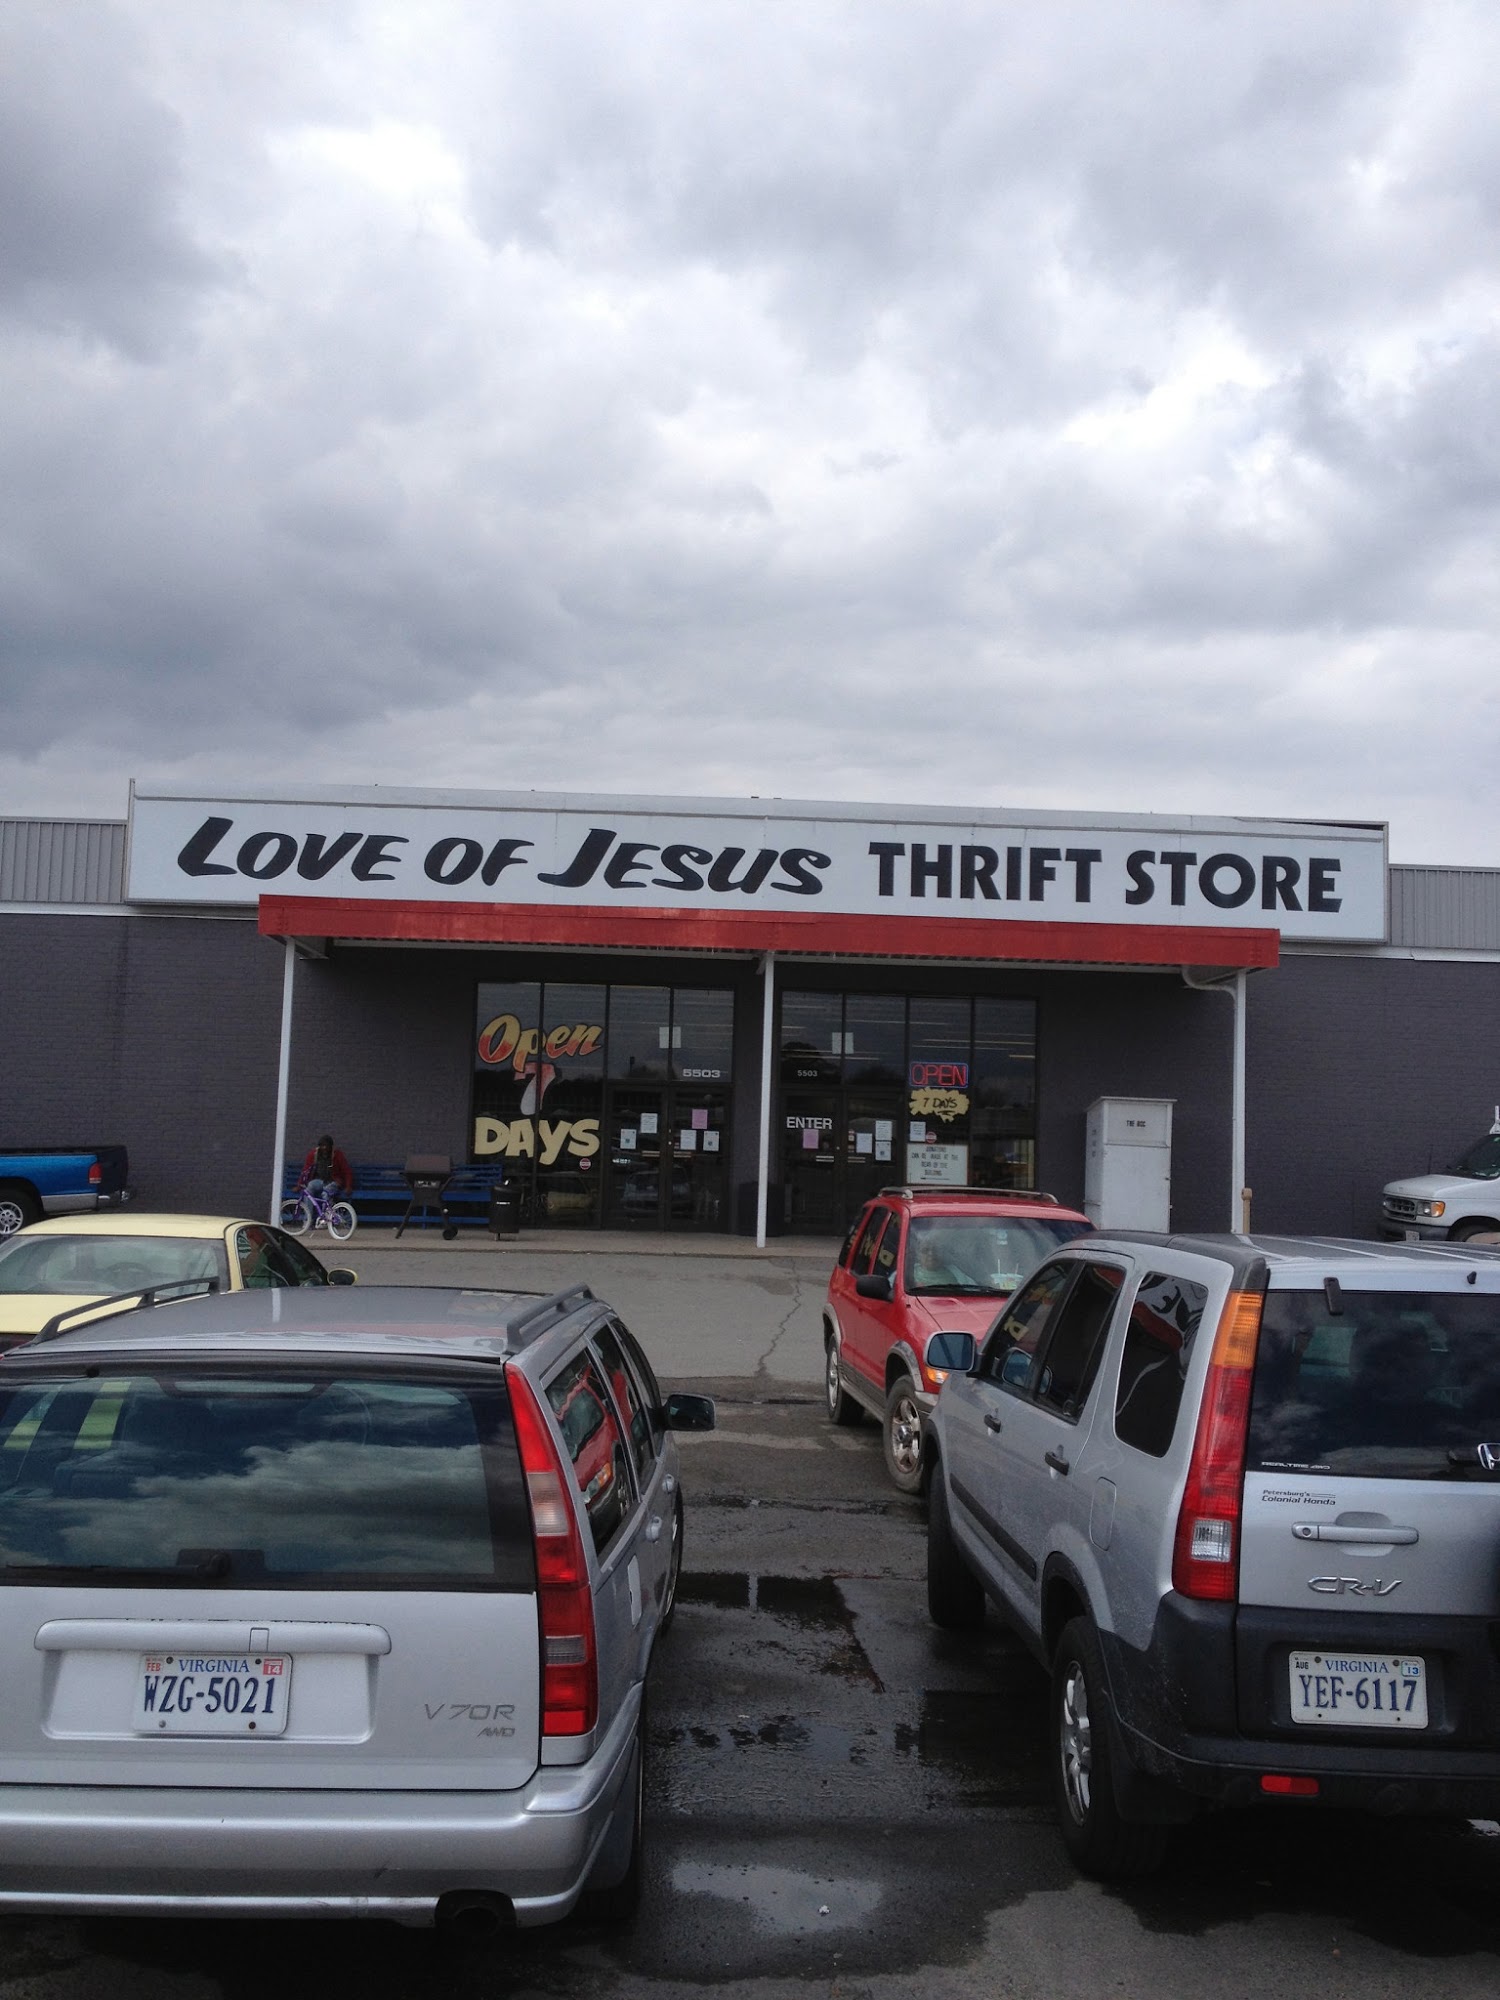 Liberation Thrift (formerly love of Jesus thrift store)